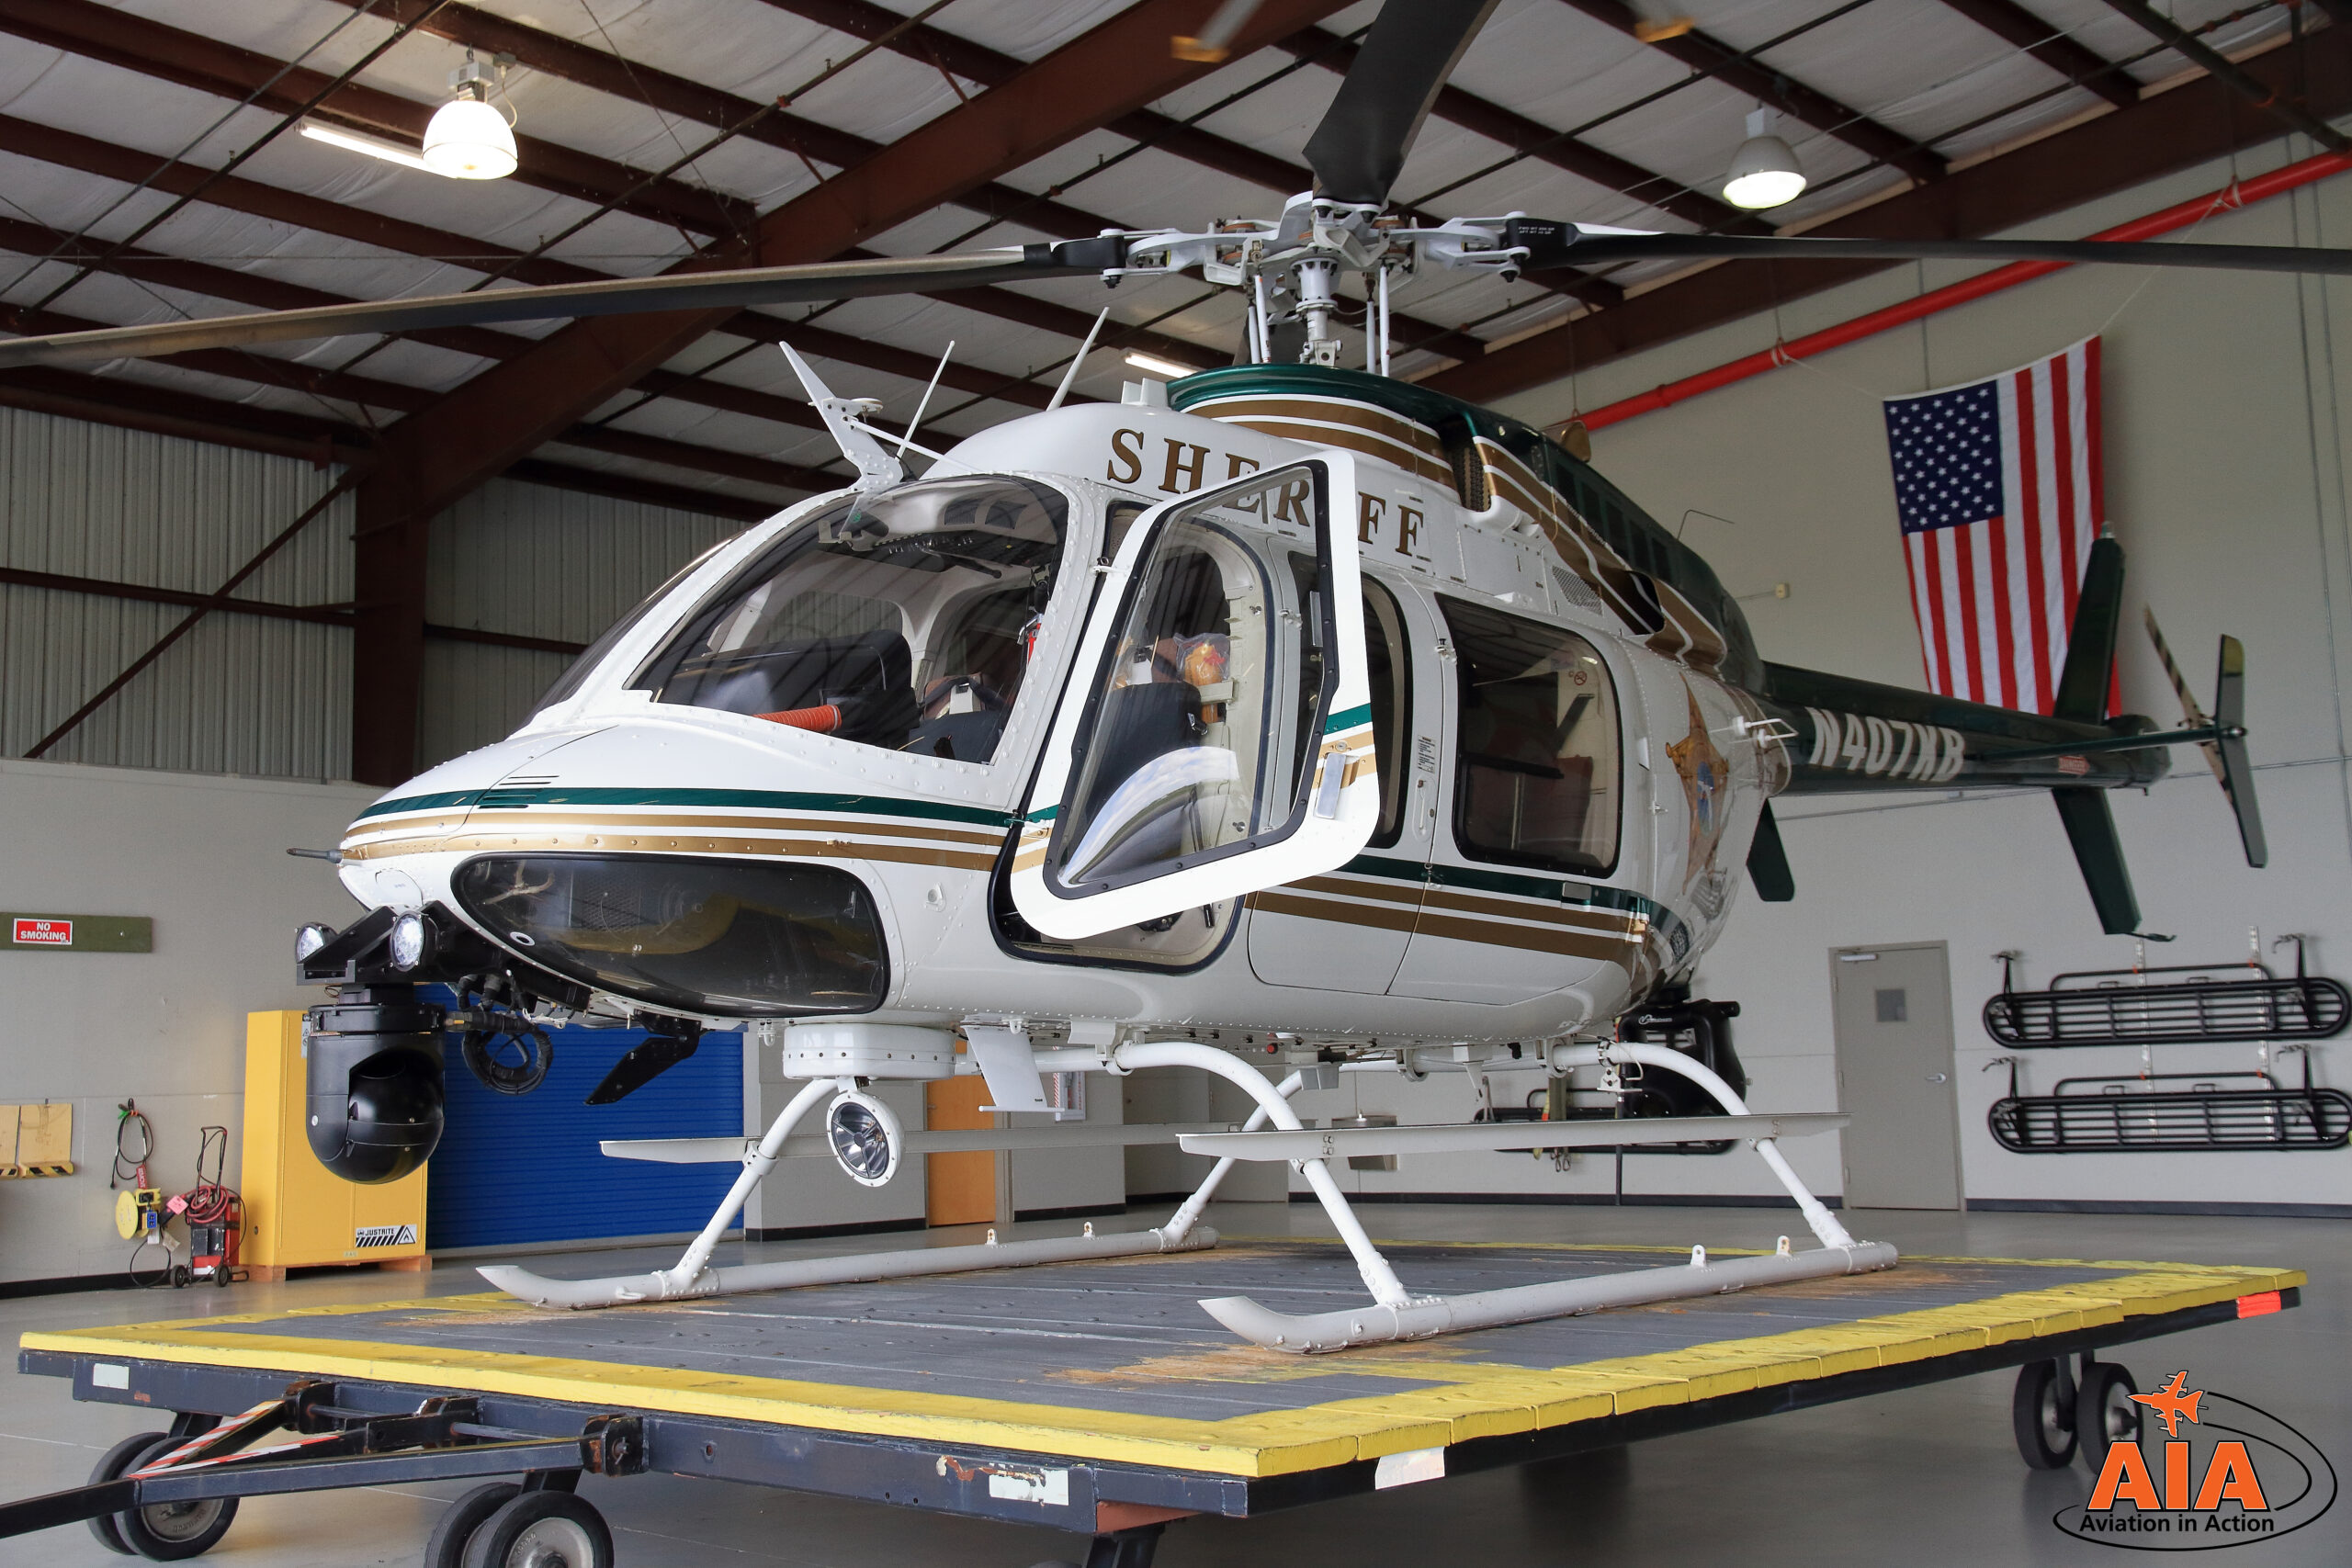 Orange County Sheriff’s Office Aviation Section